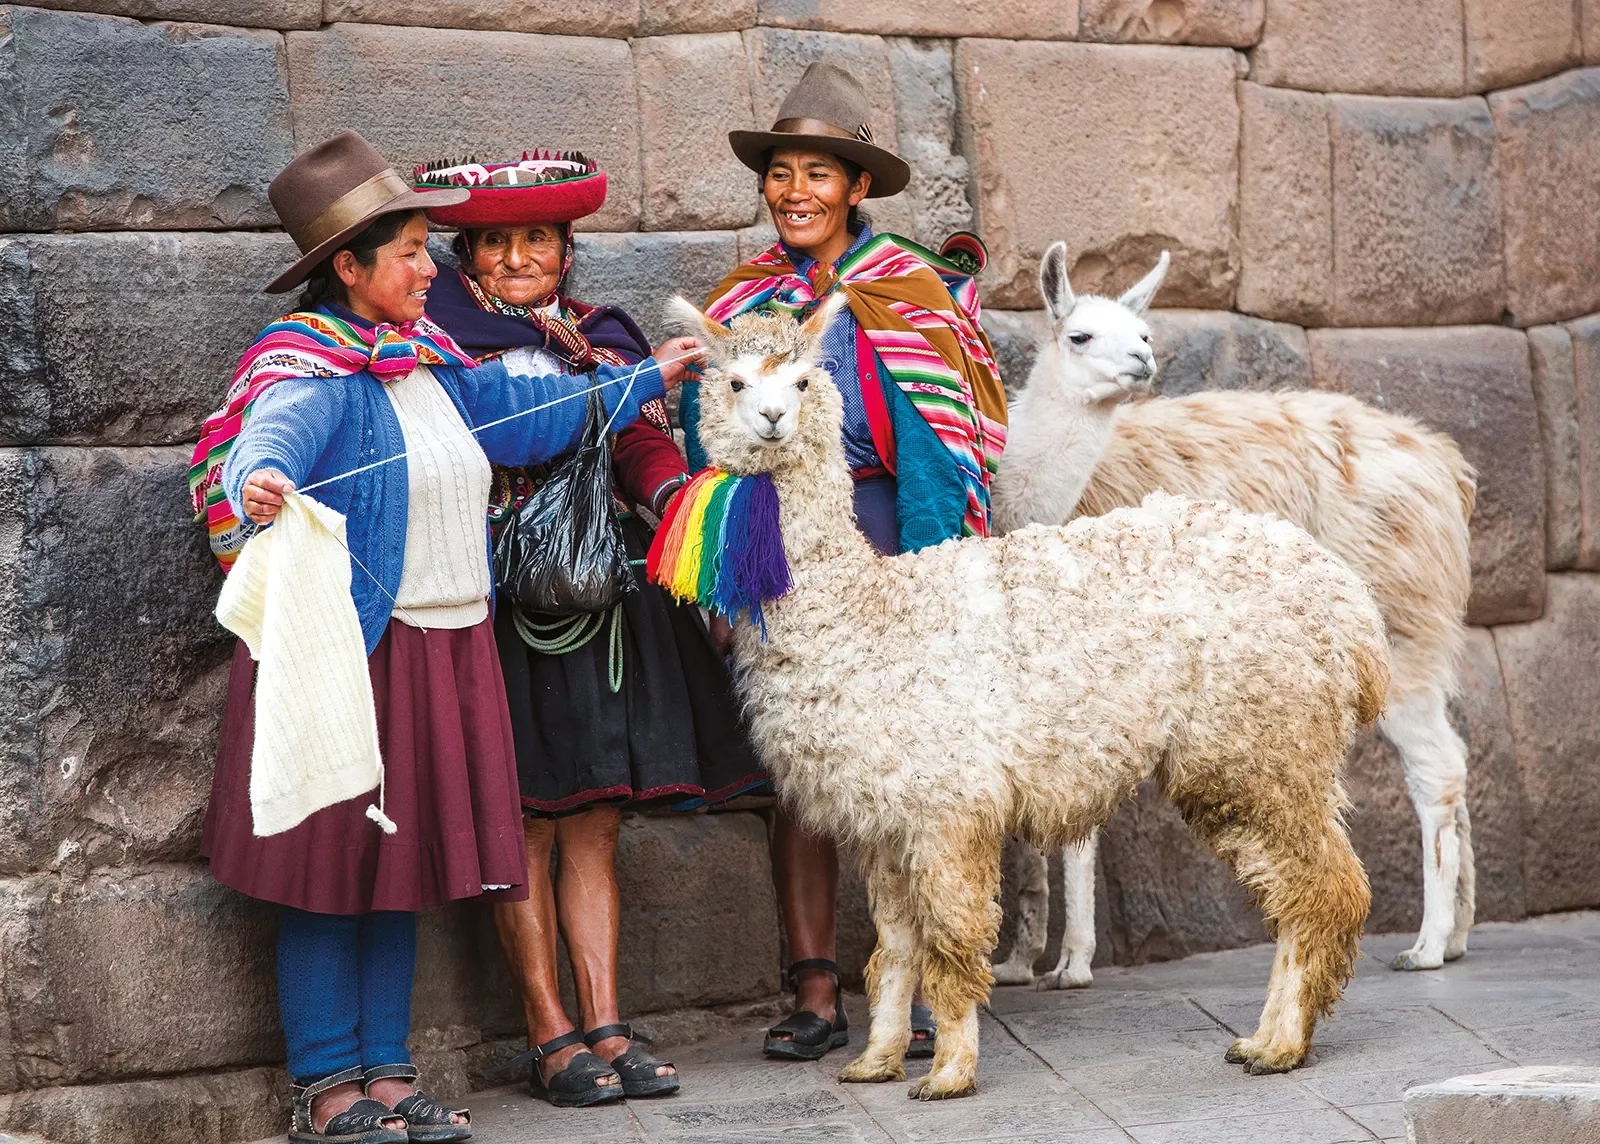 Three locals in colorful clothing, two llamas.